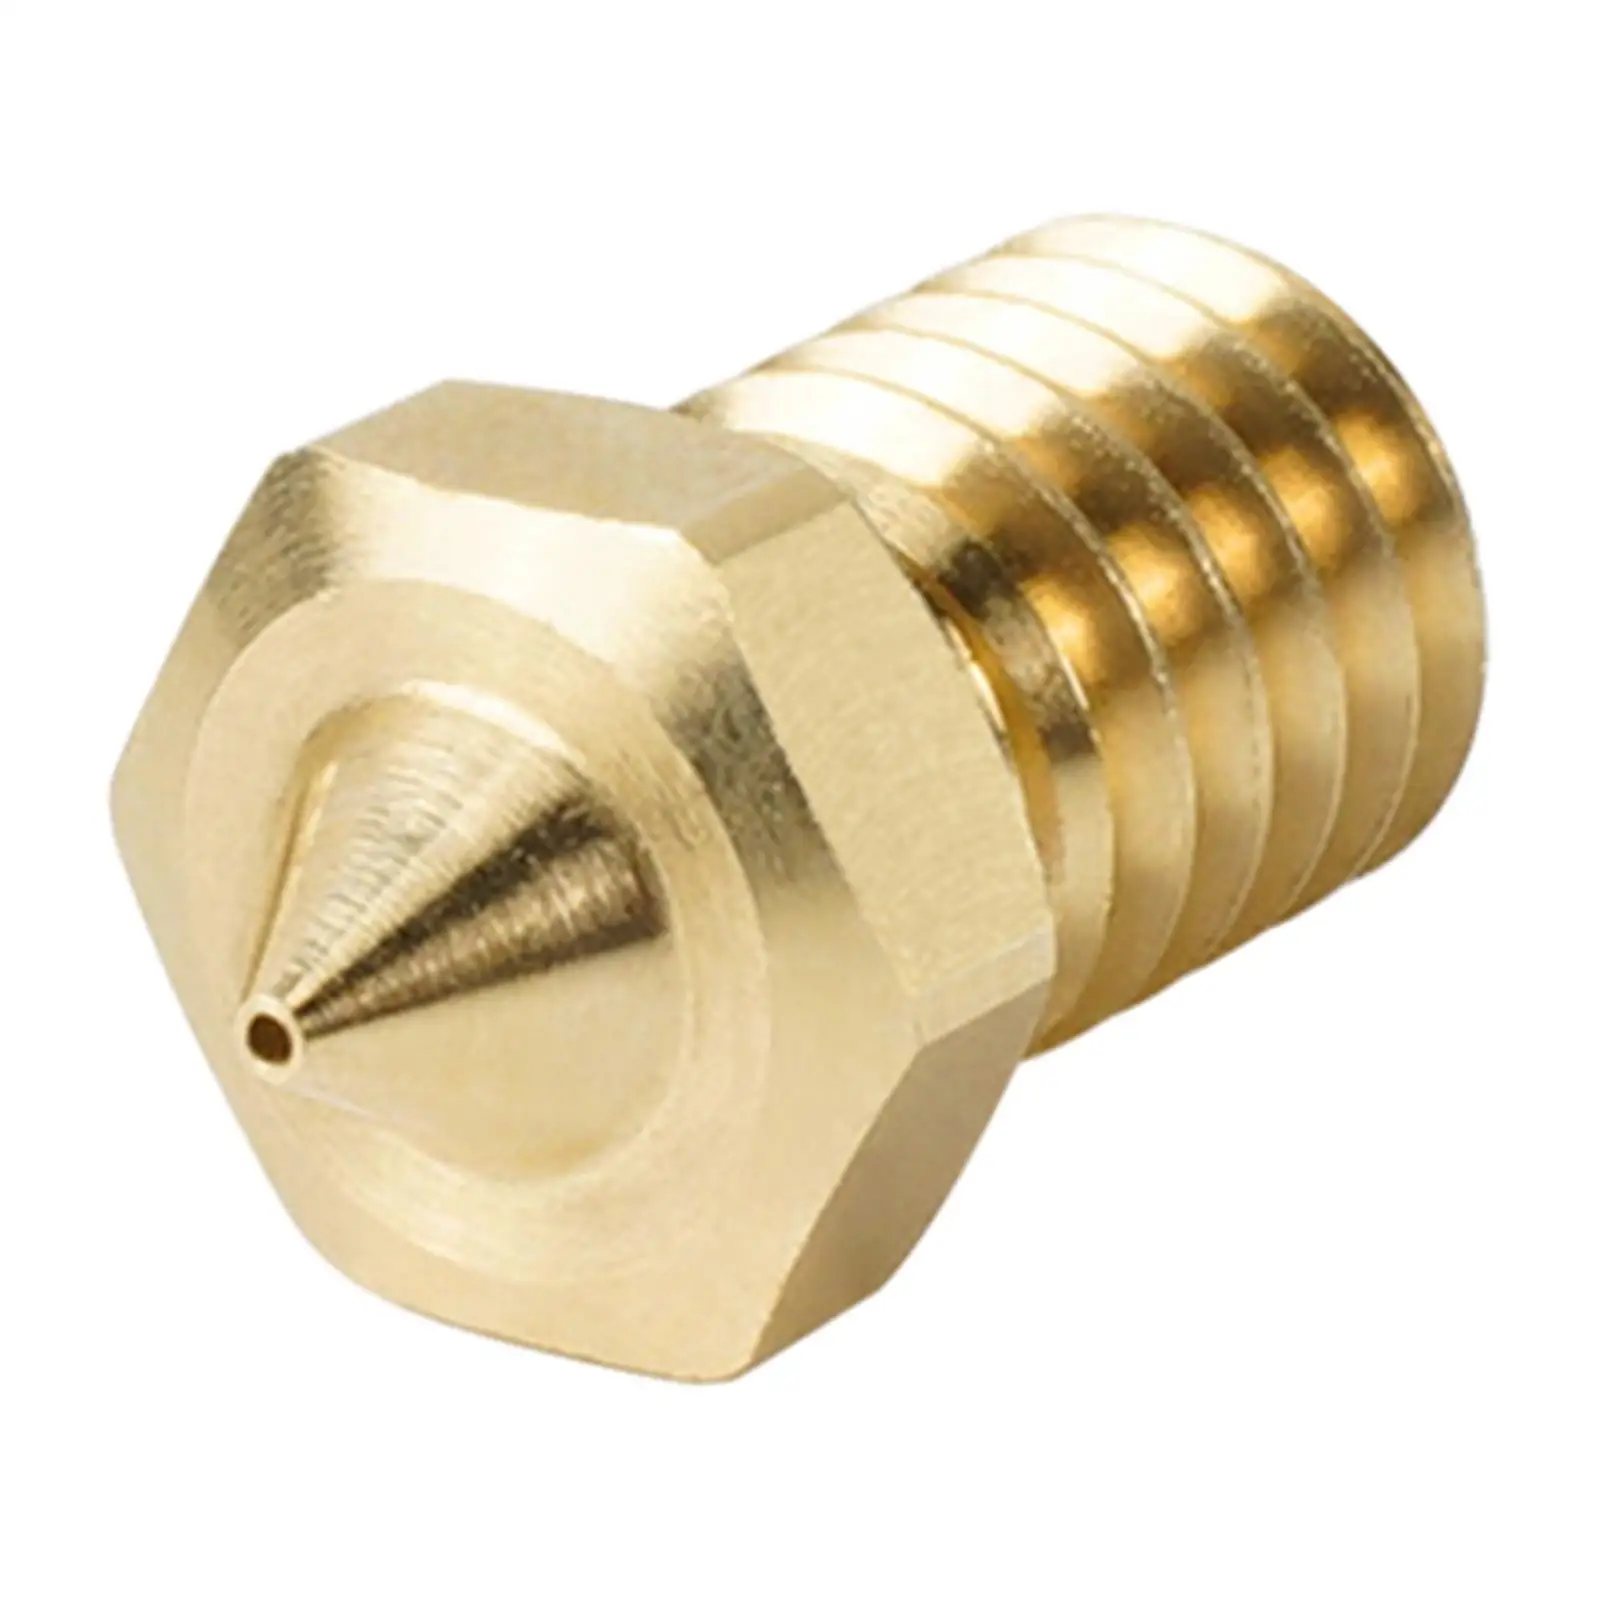 Portable High Speed Nozzle  Part Rust Copper for Filament